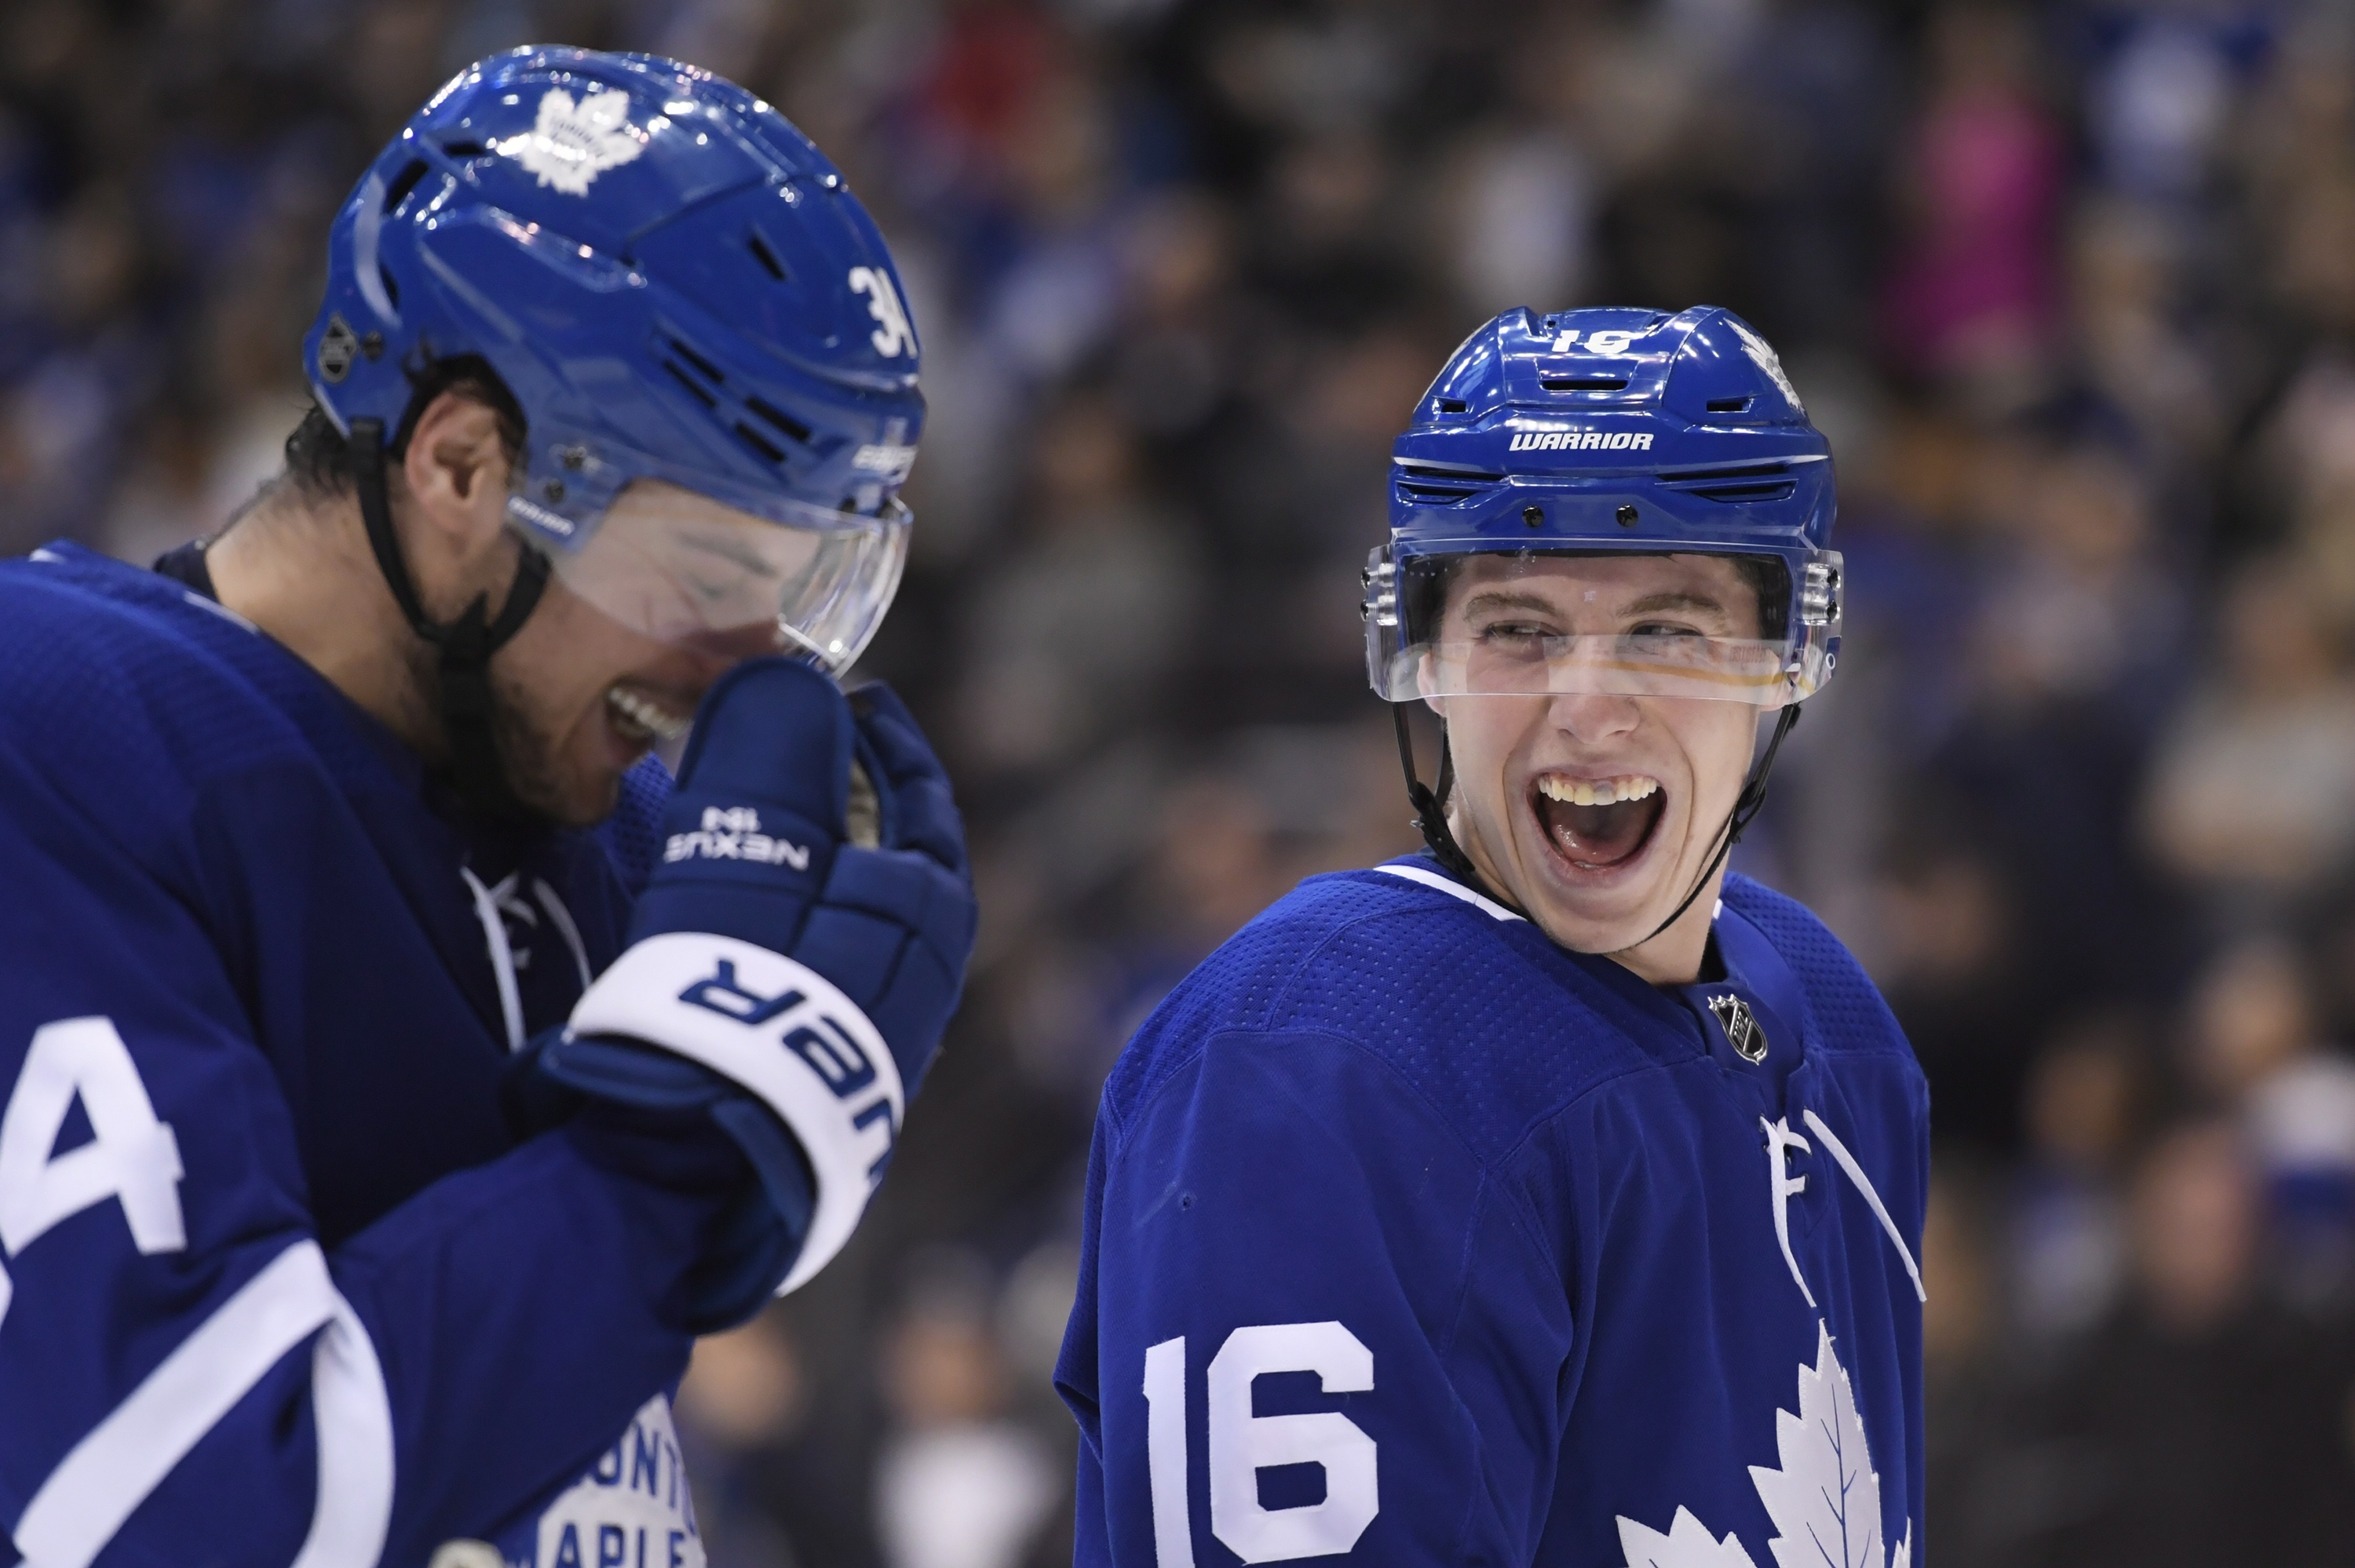 Toronto Maple Leafs sign Mitch Marner to entry-level contract